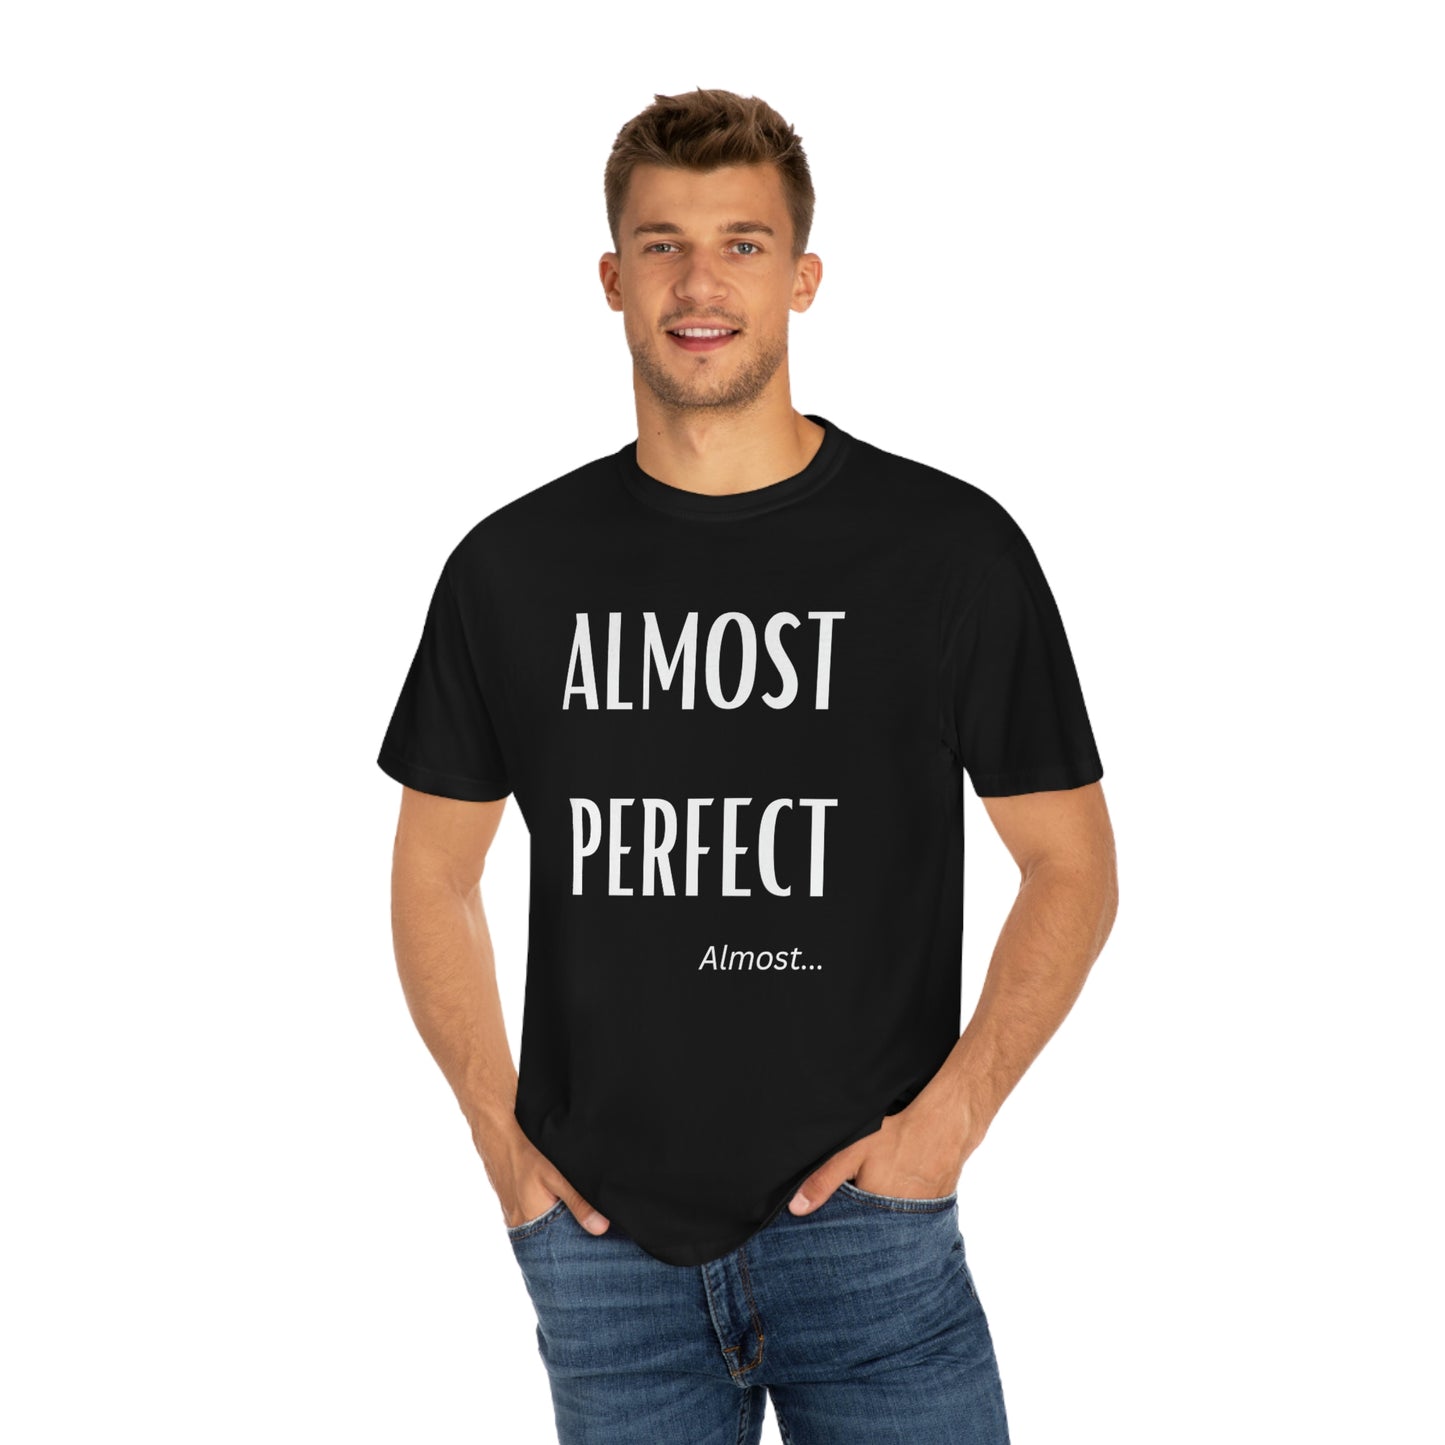 Almost Perfect (Black T )Unisex Garment-Dyed T-shirt